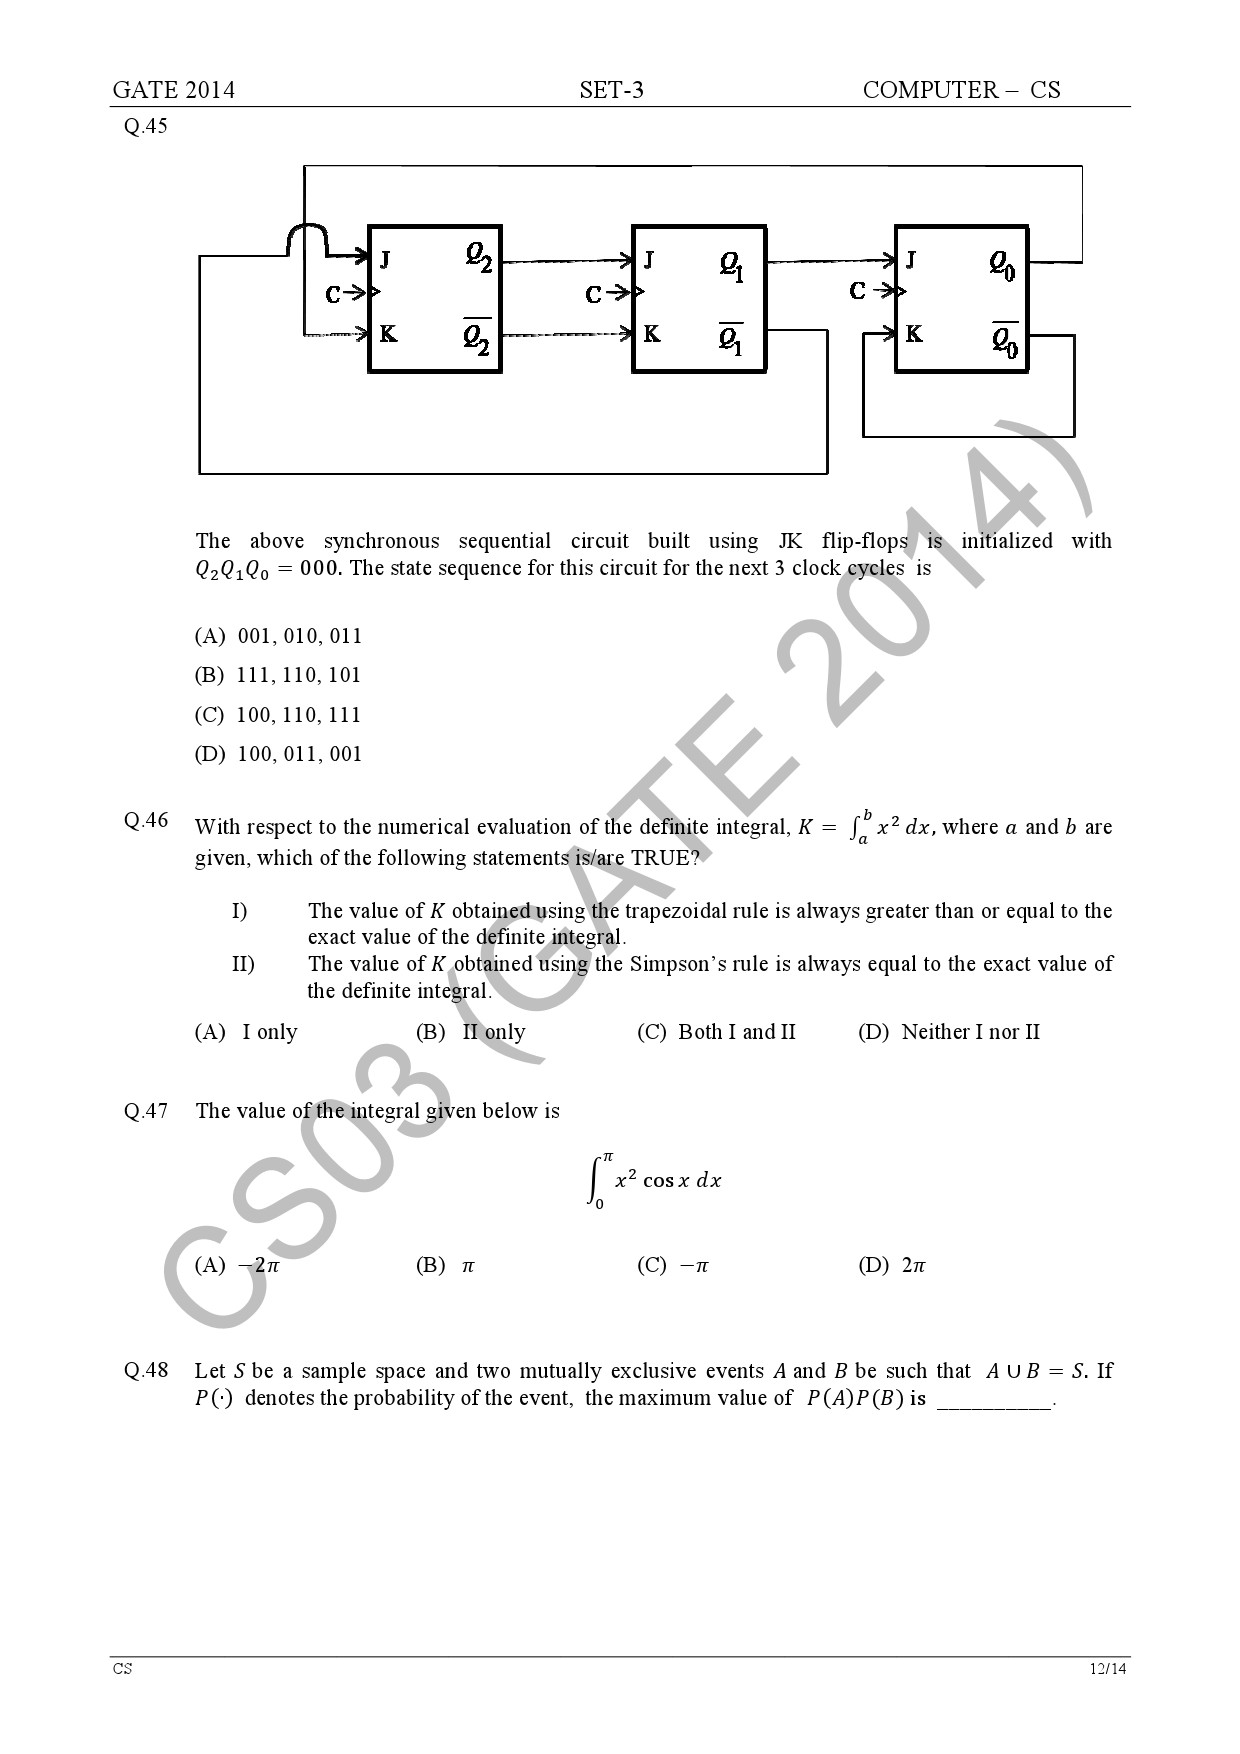 GATE Exam Question Paper 2014 Computer Science and Information Technology Set 3 18